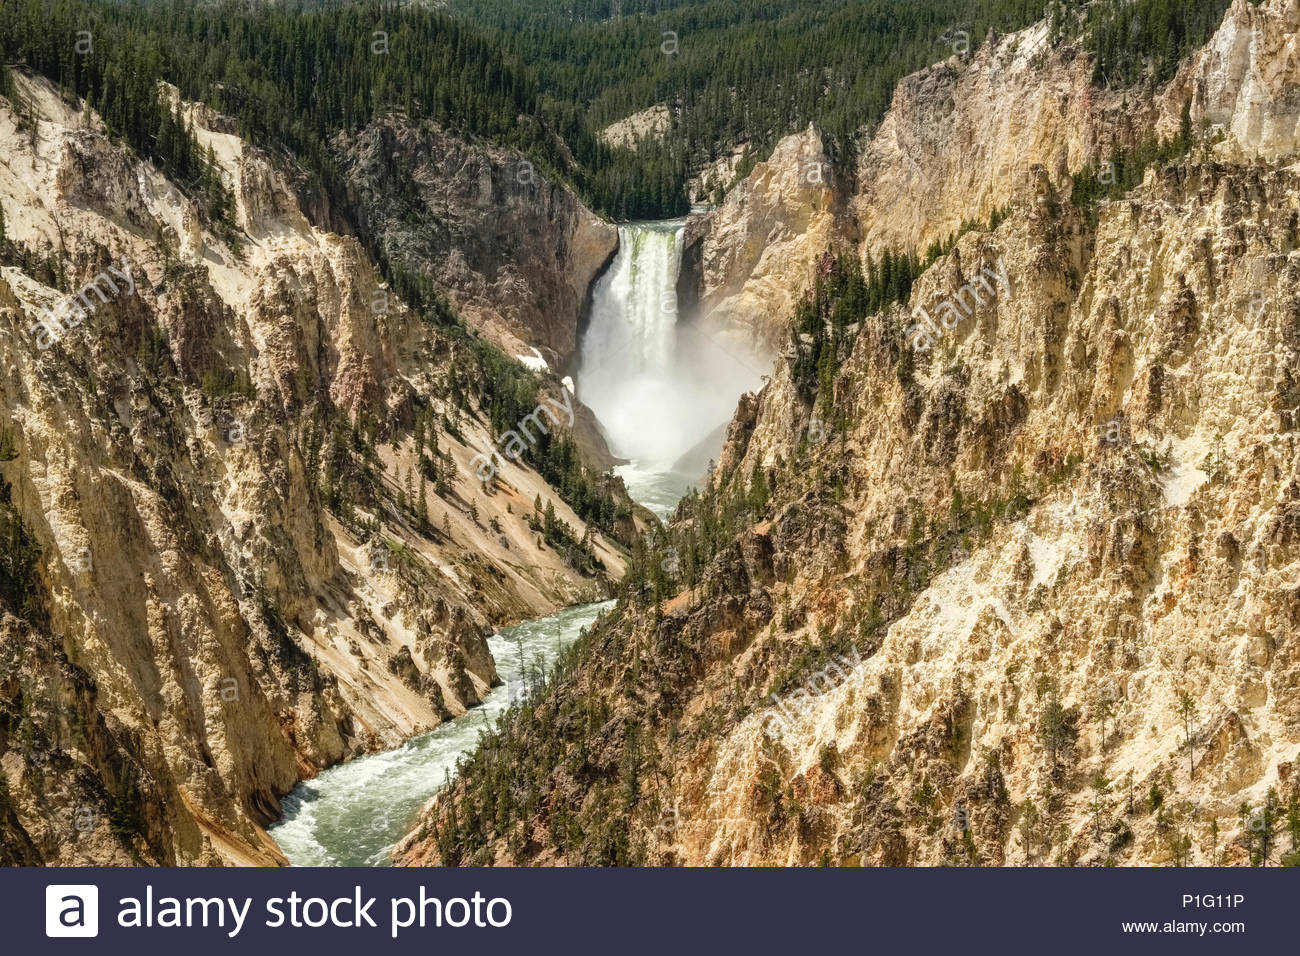 Grand Canyon Of Yellowstone River With Lower Falls In Background